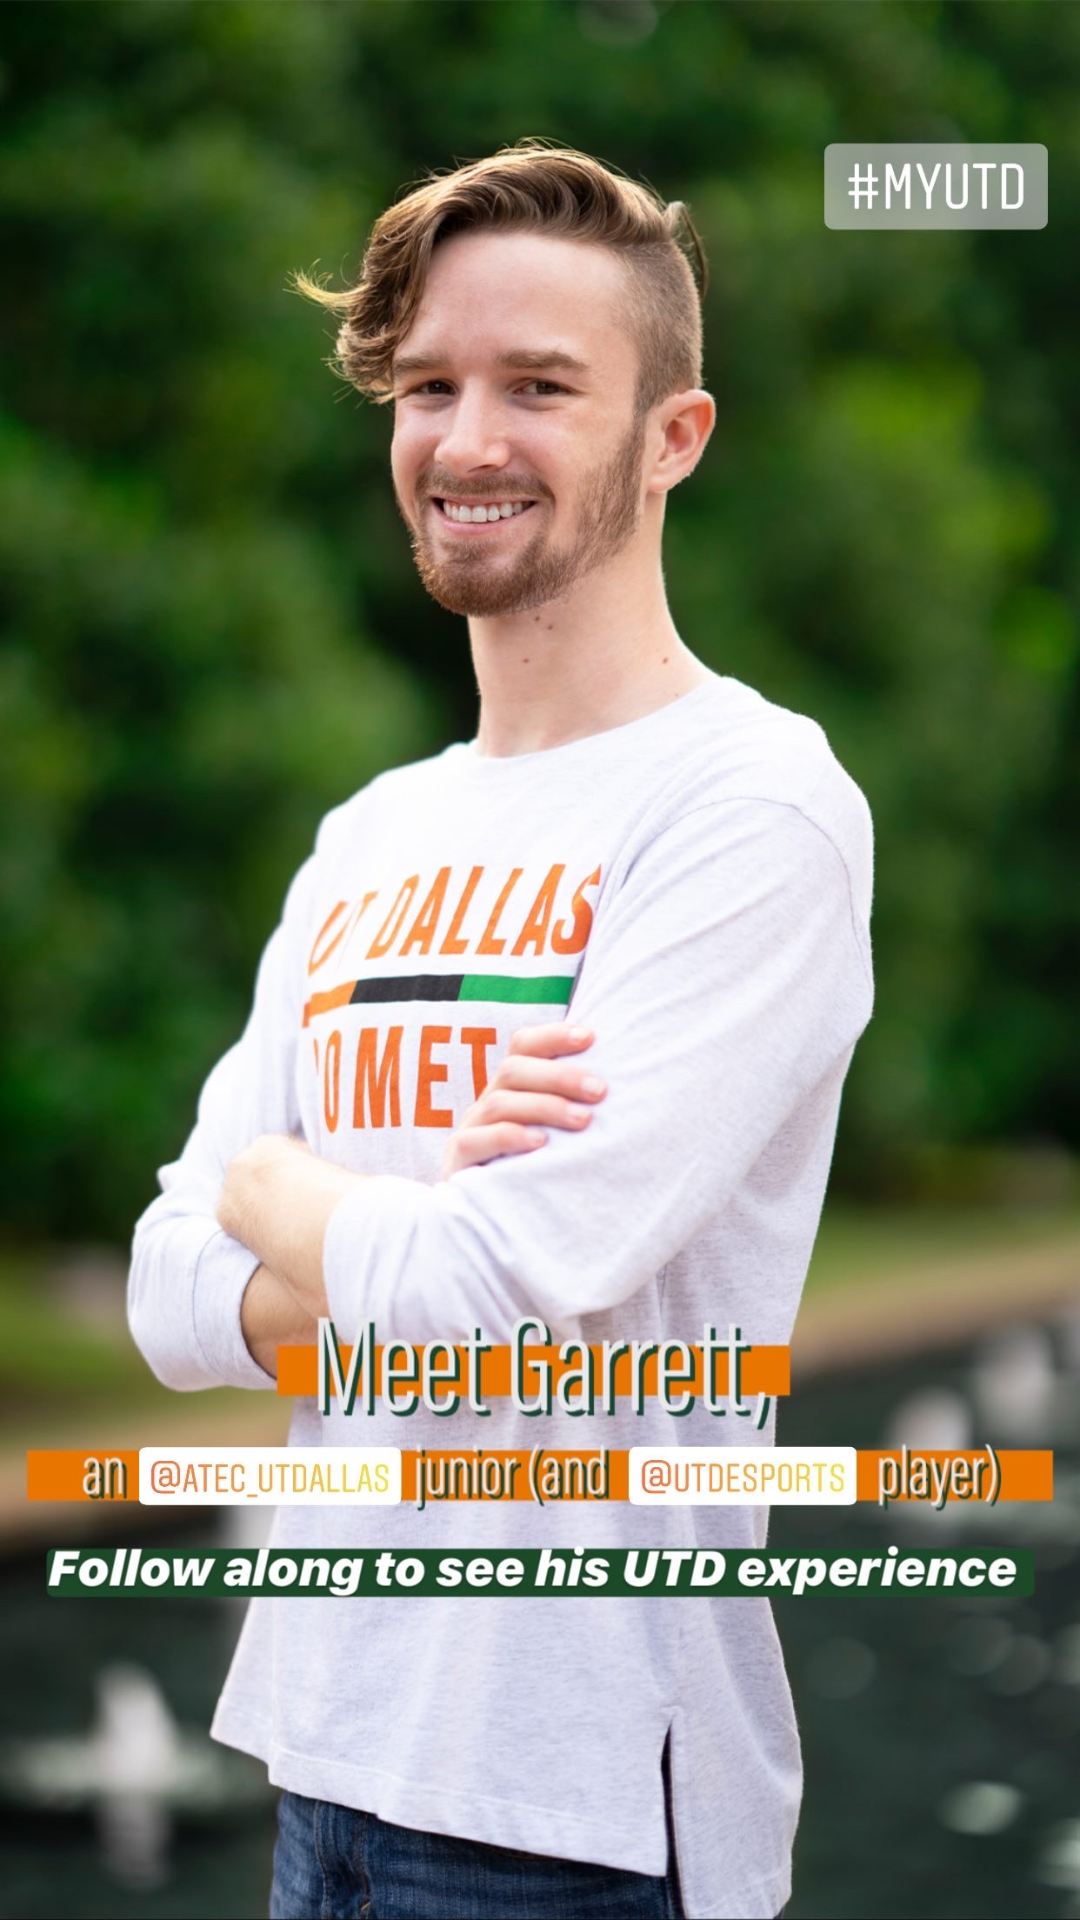 Garrett outdoors, smiling and facing the camera with crossed arms. His shirt reads UT Dallas Comets.